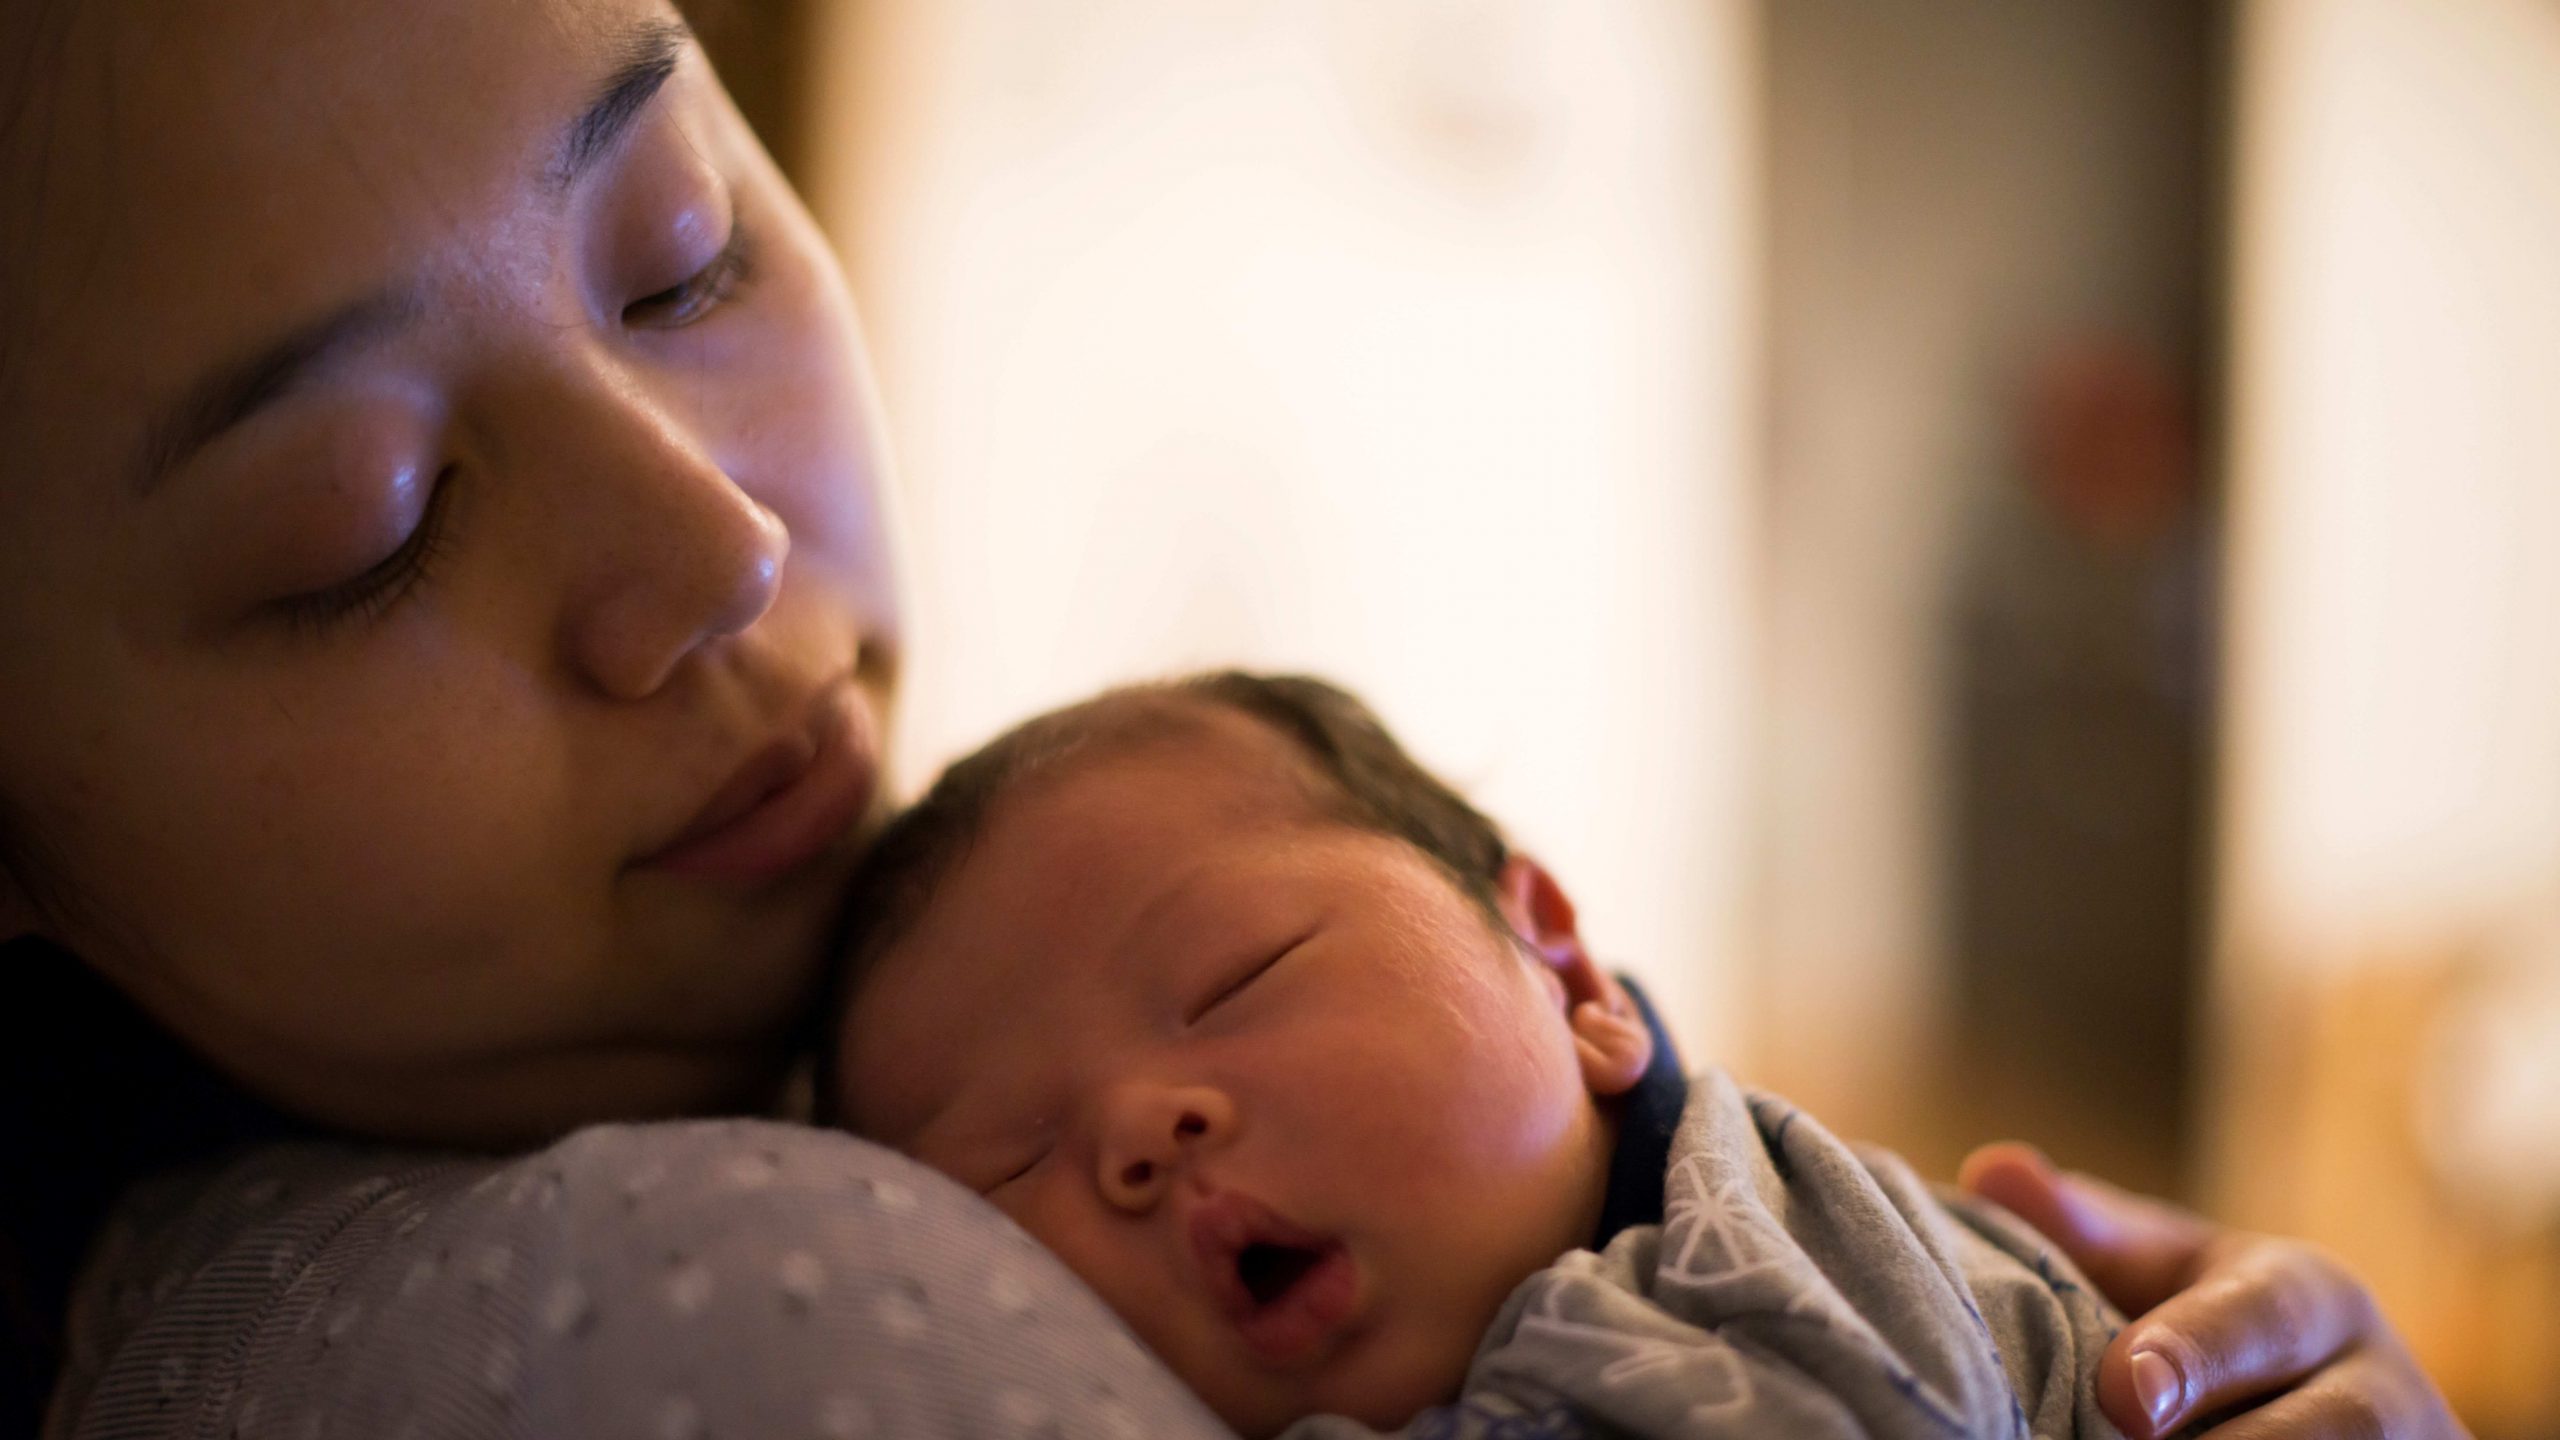 Sixteen Network Hospitals Honored for Reducing C-Section Births